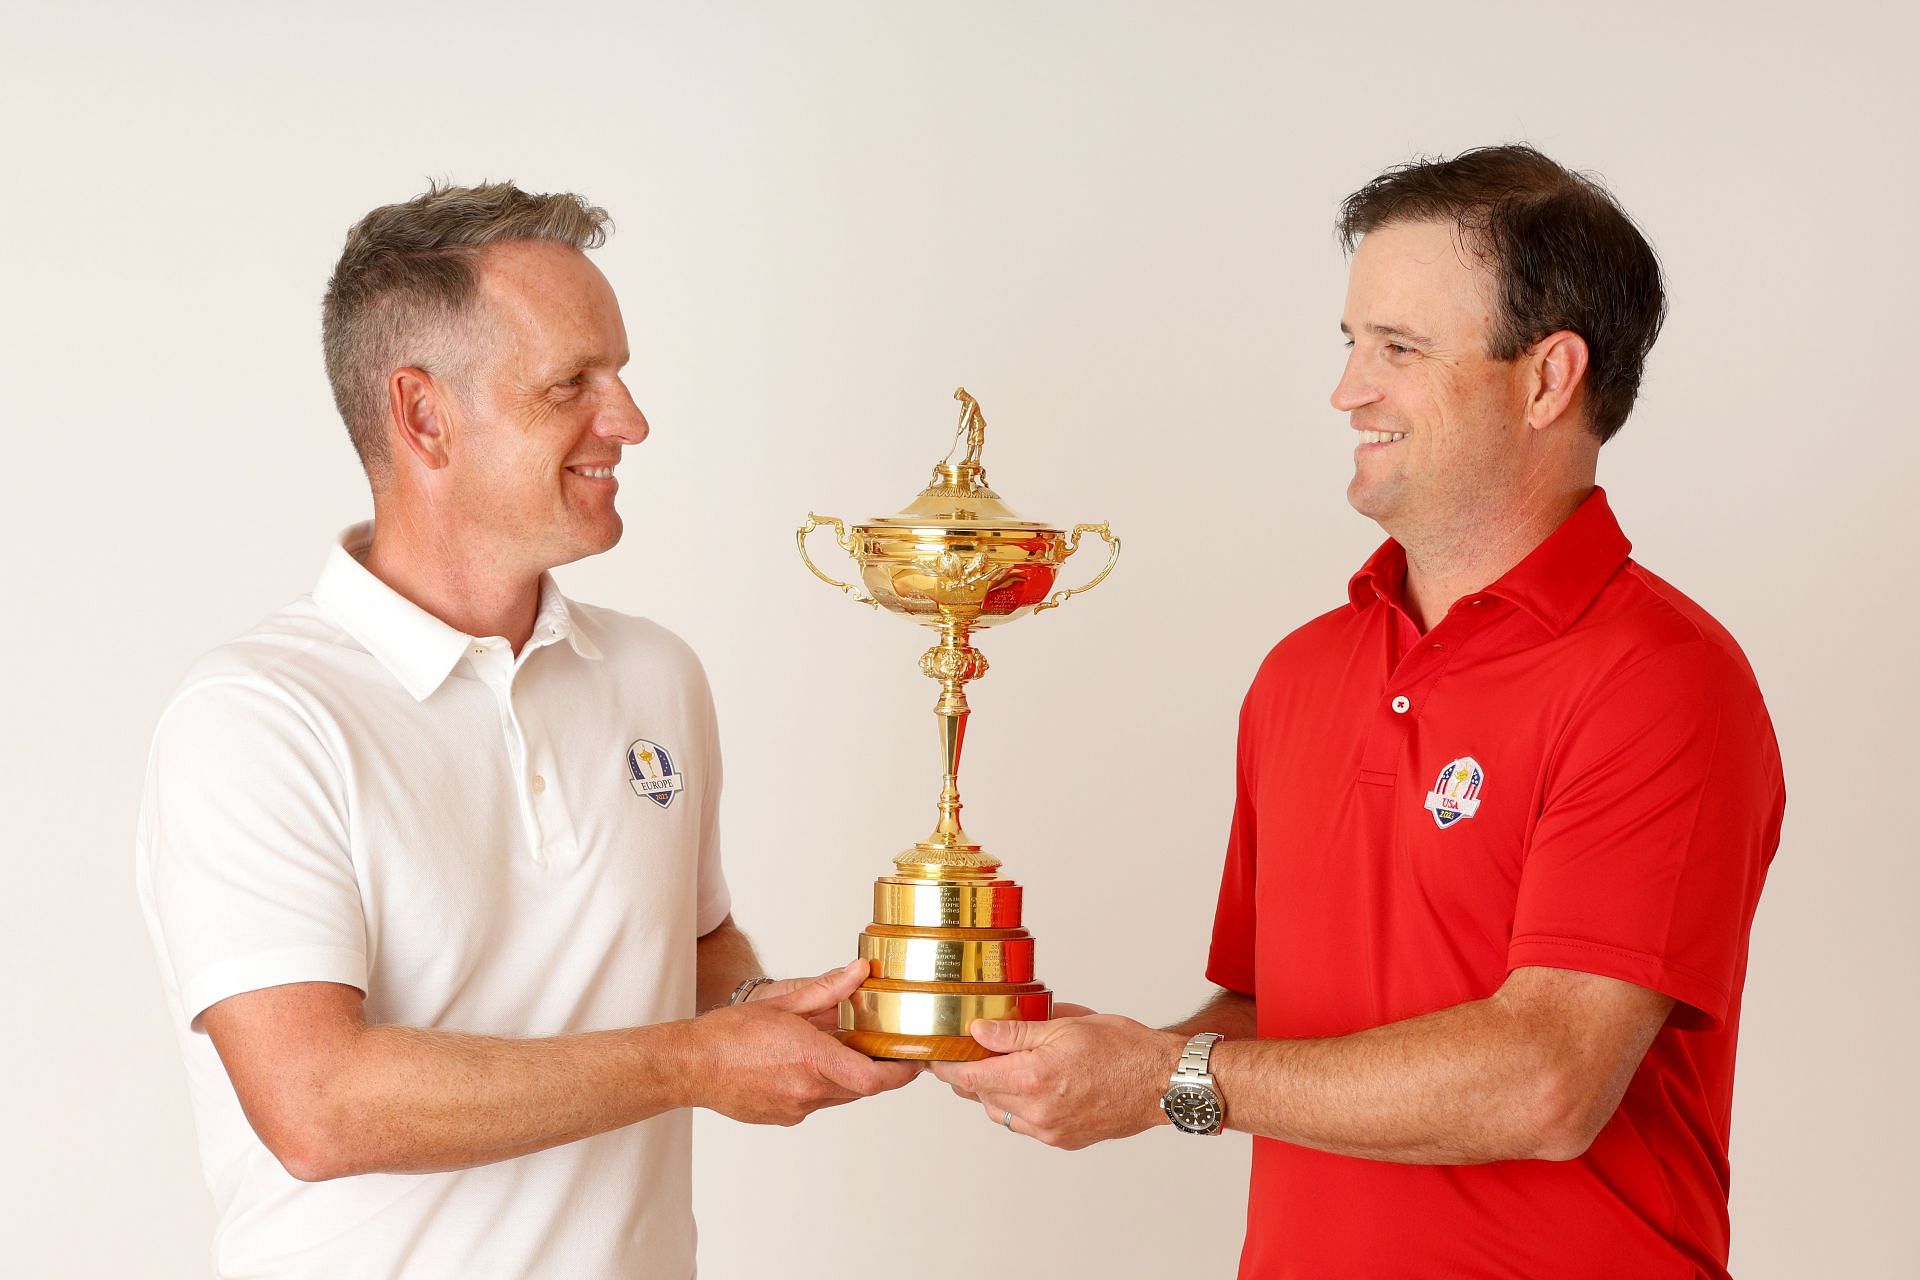 Team Captains Luke Donald and Zach Johnson pose for a photograph with the Ryder Cup Trophy during the Year to Go Media Event on October 4, 2022